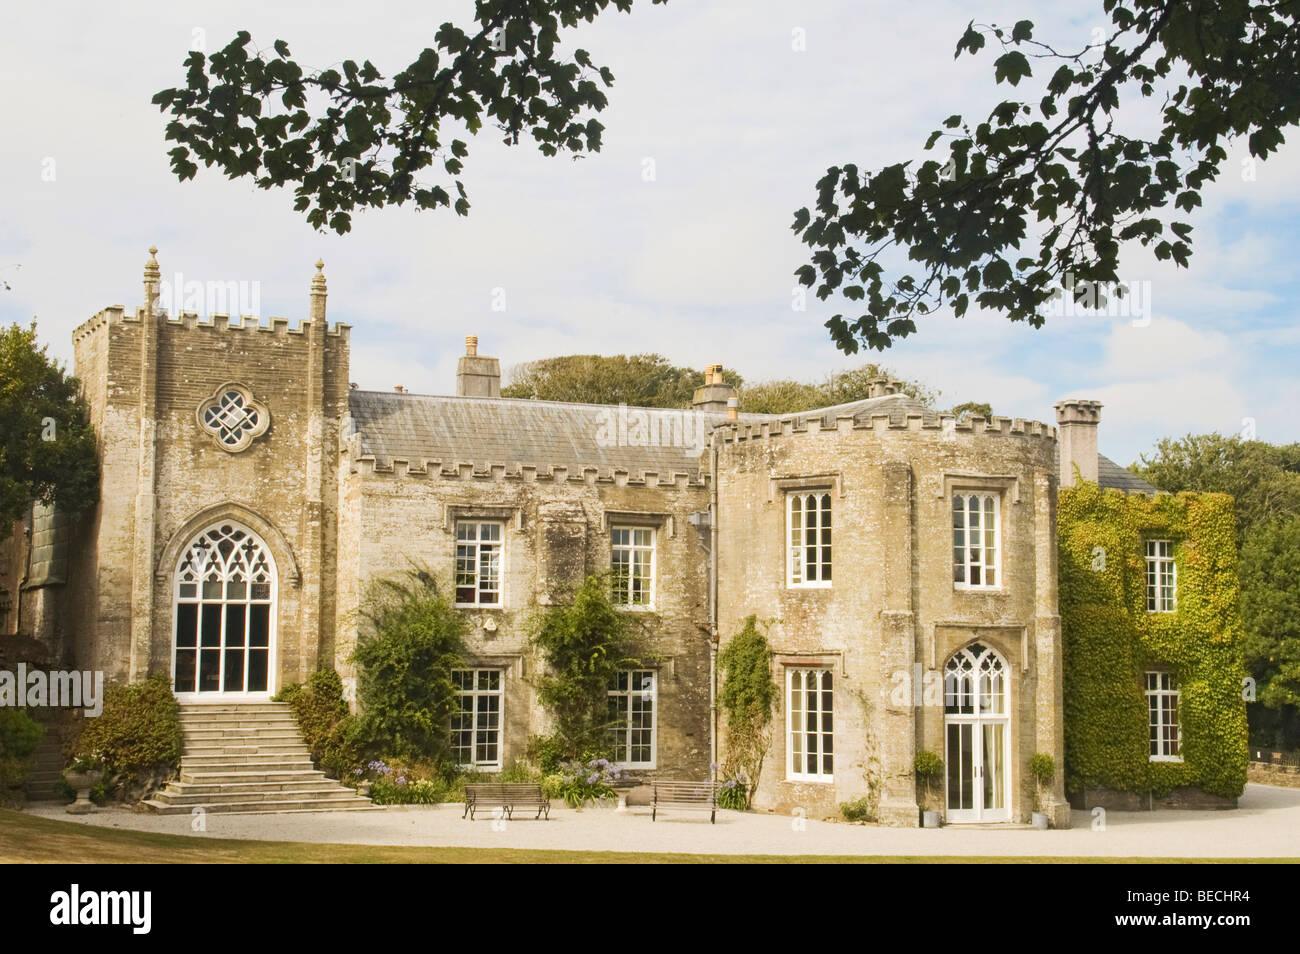 Prideaux Place, Elizabethan house, Padstow, Cornwall, South England, England, United Kingdom Stock Photo